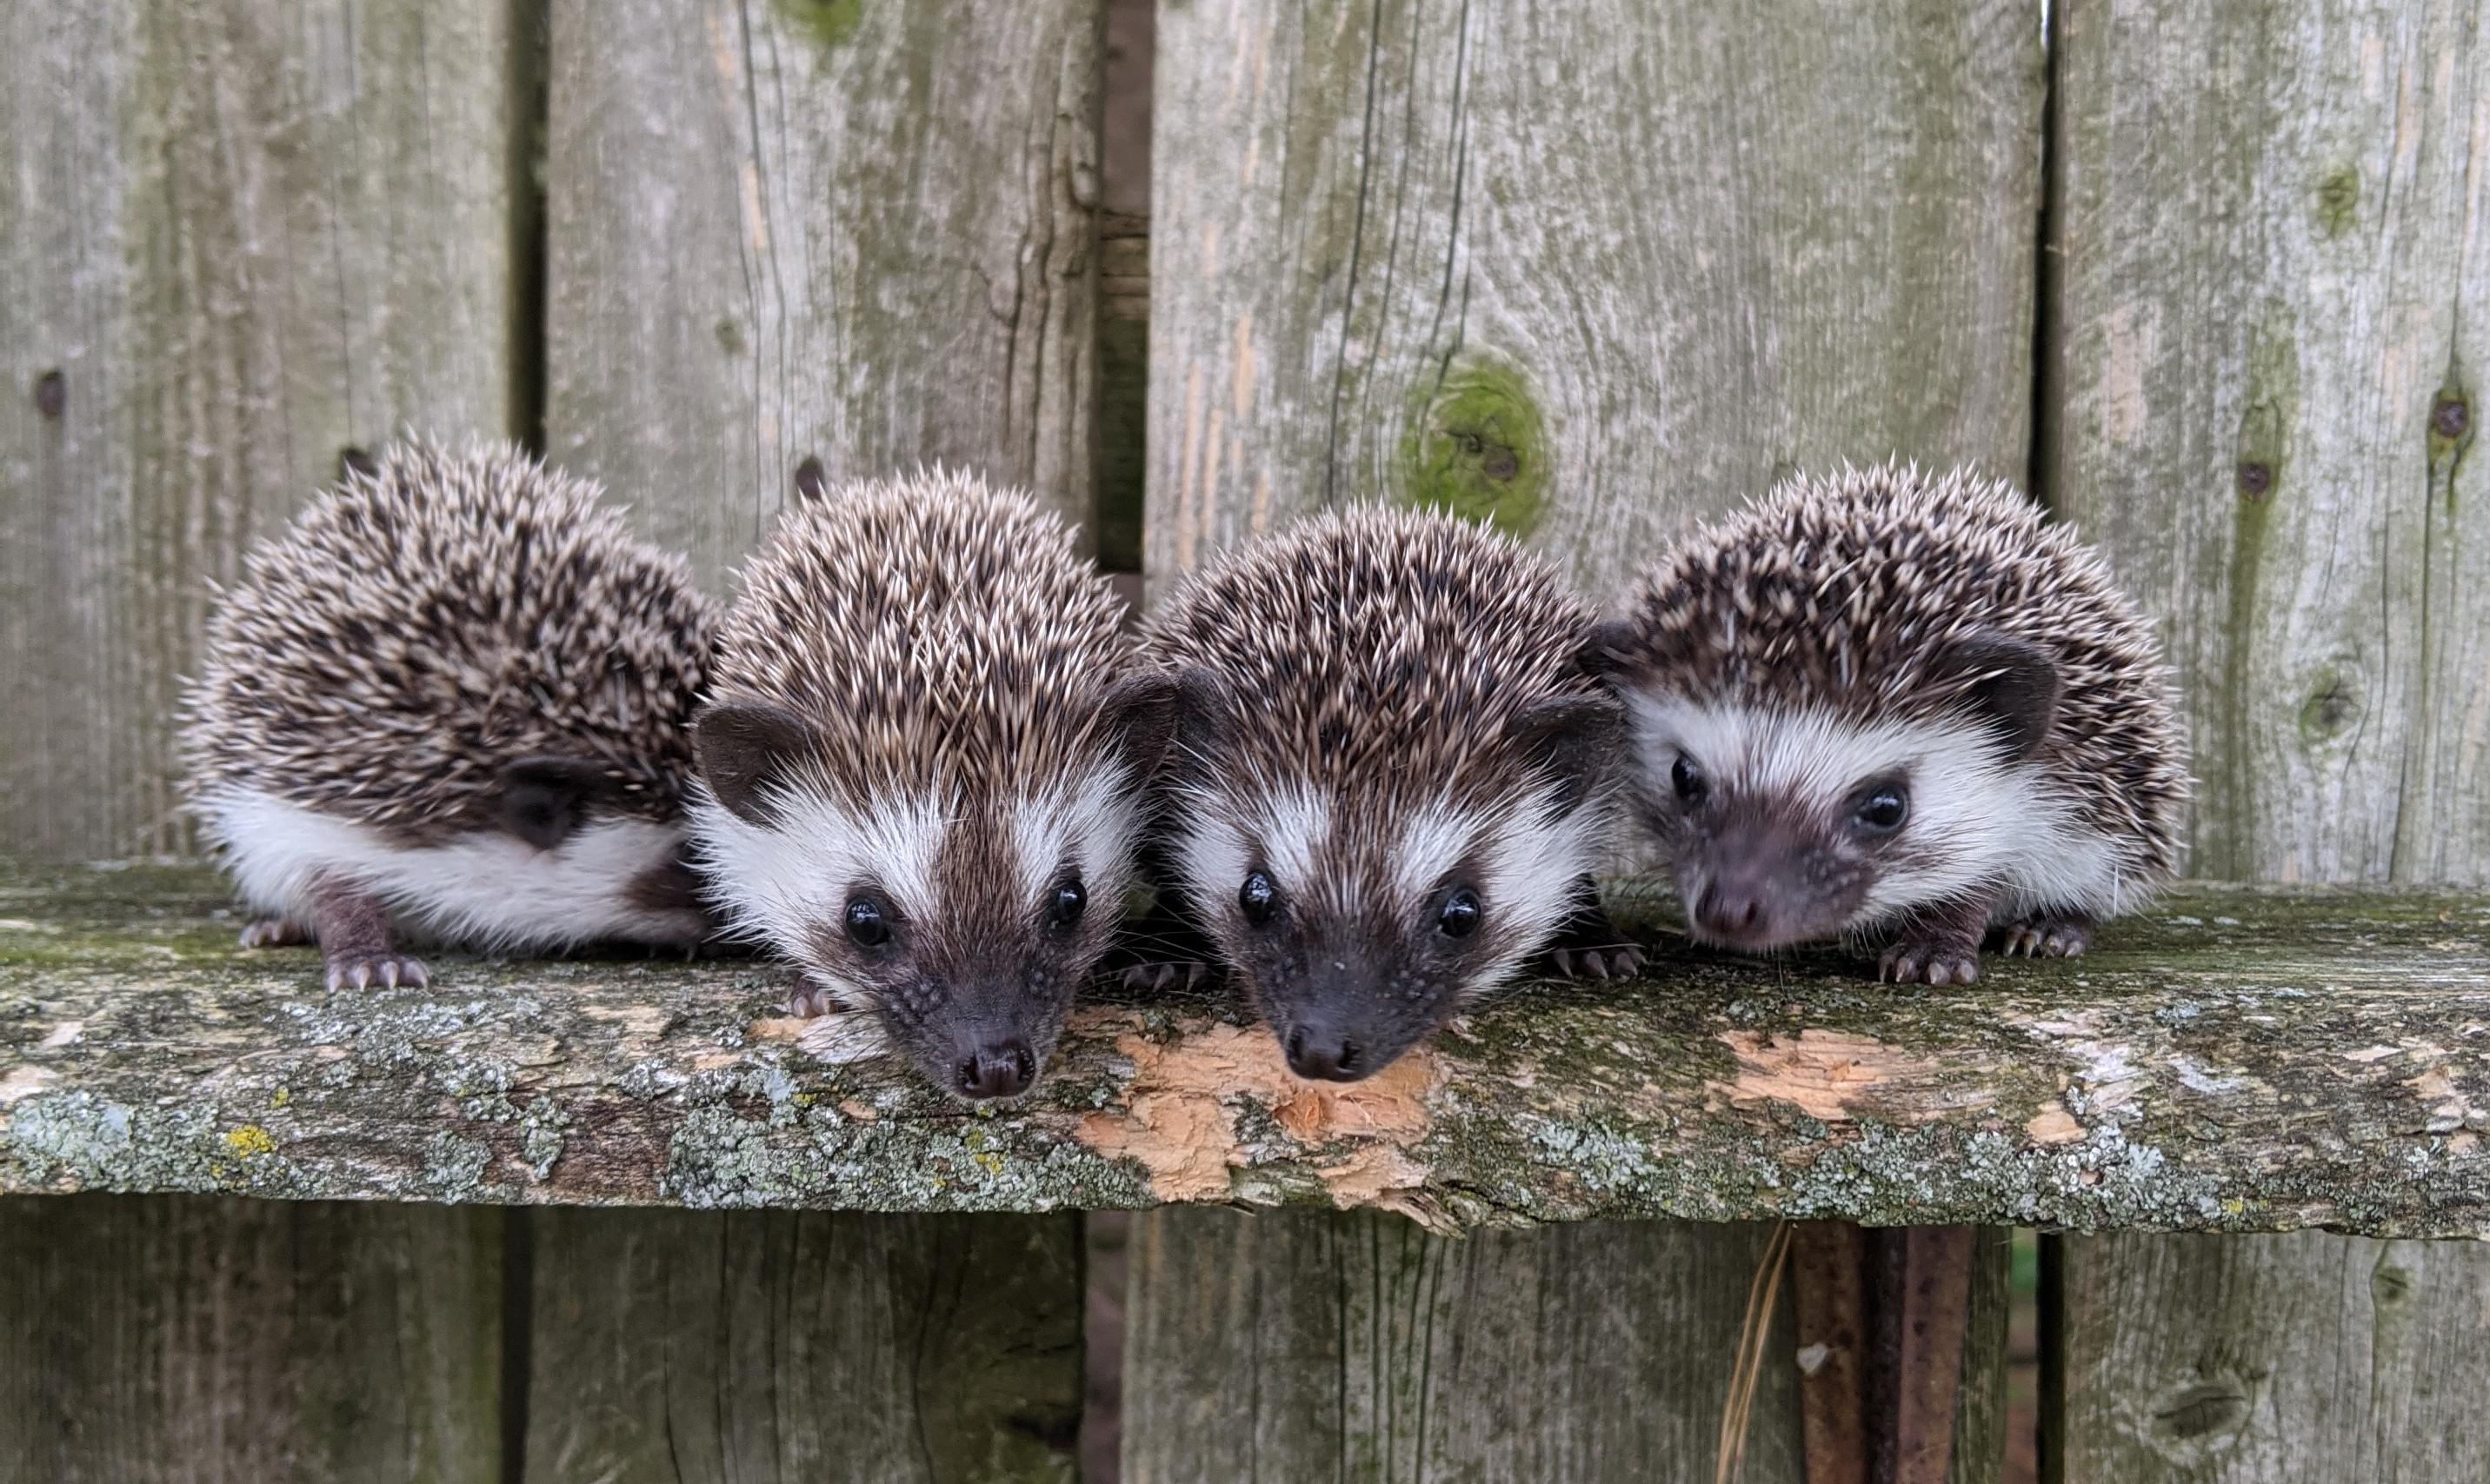 What is a family of hedgehogs called?